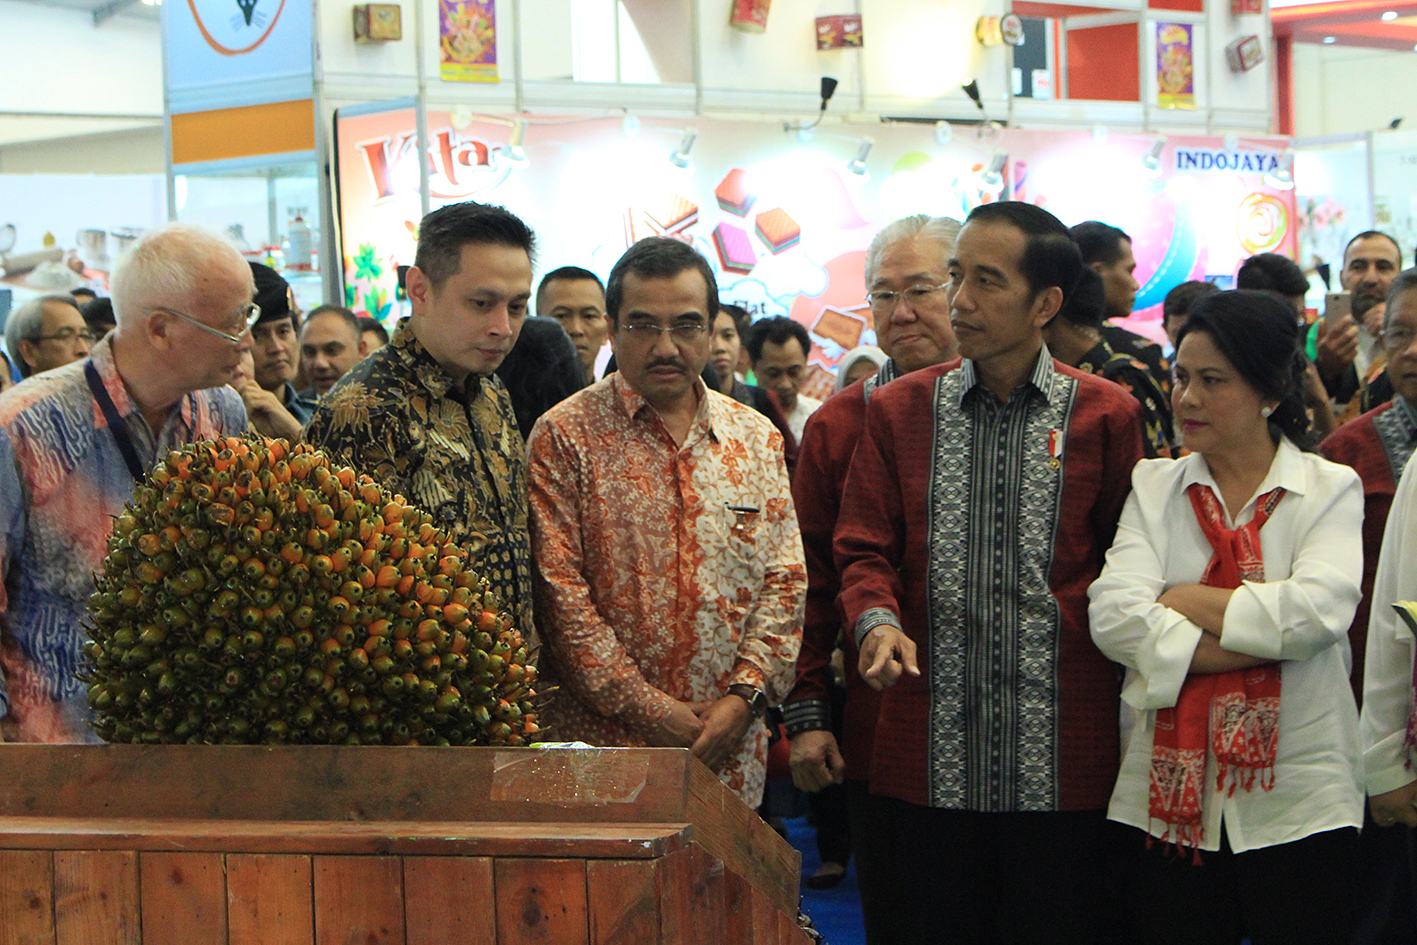 [Sawit Indonesia] President Jokowi Shows Interest in Asian Agri’s Topaz Seeds